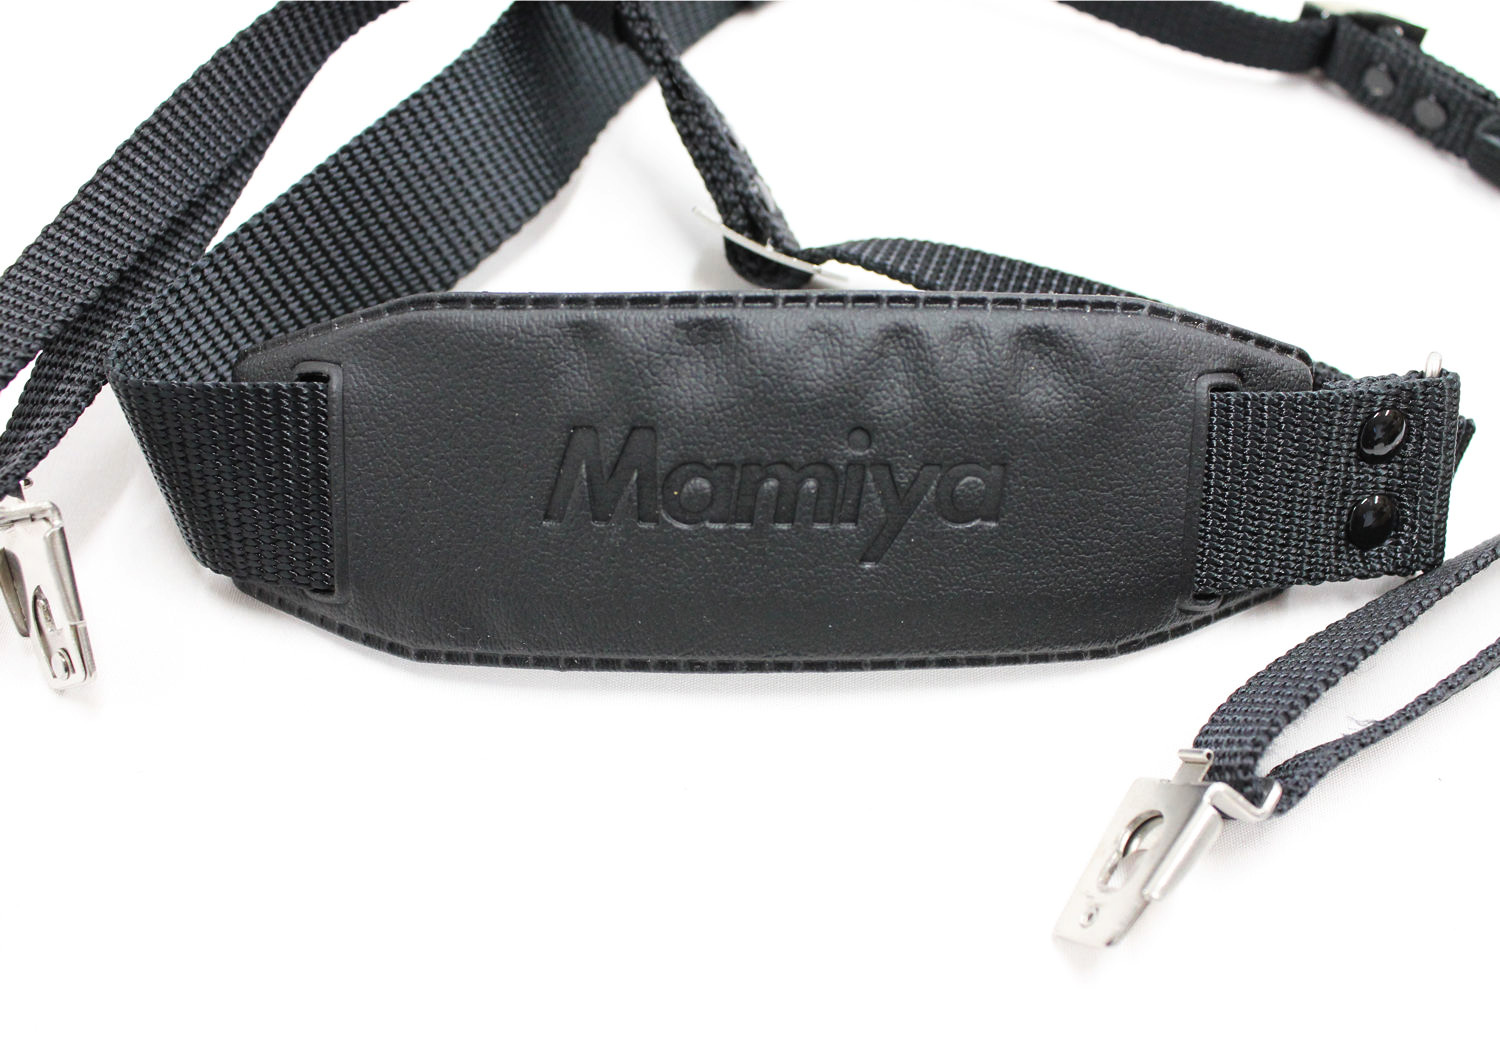 [Mint] Mamiya Neck Strap with Pad for Mamiya for M645 series from Japan